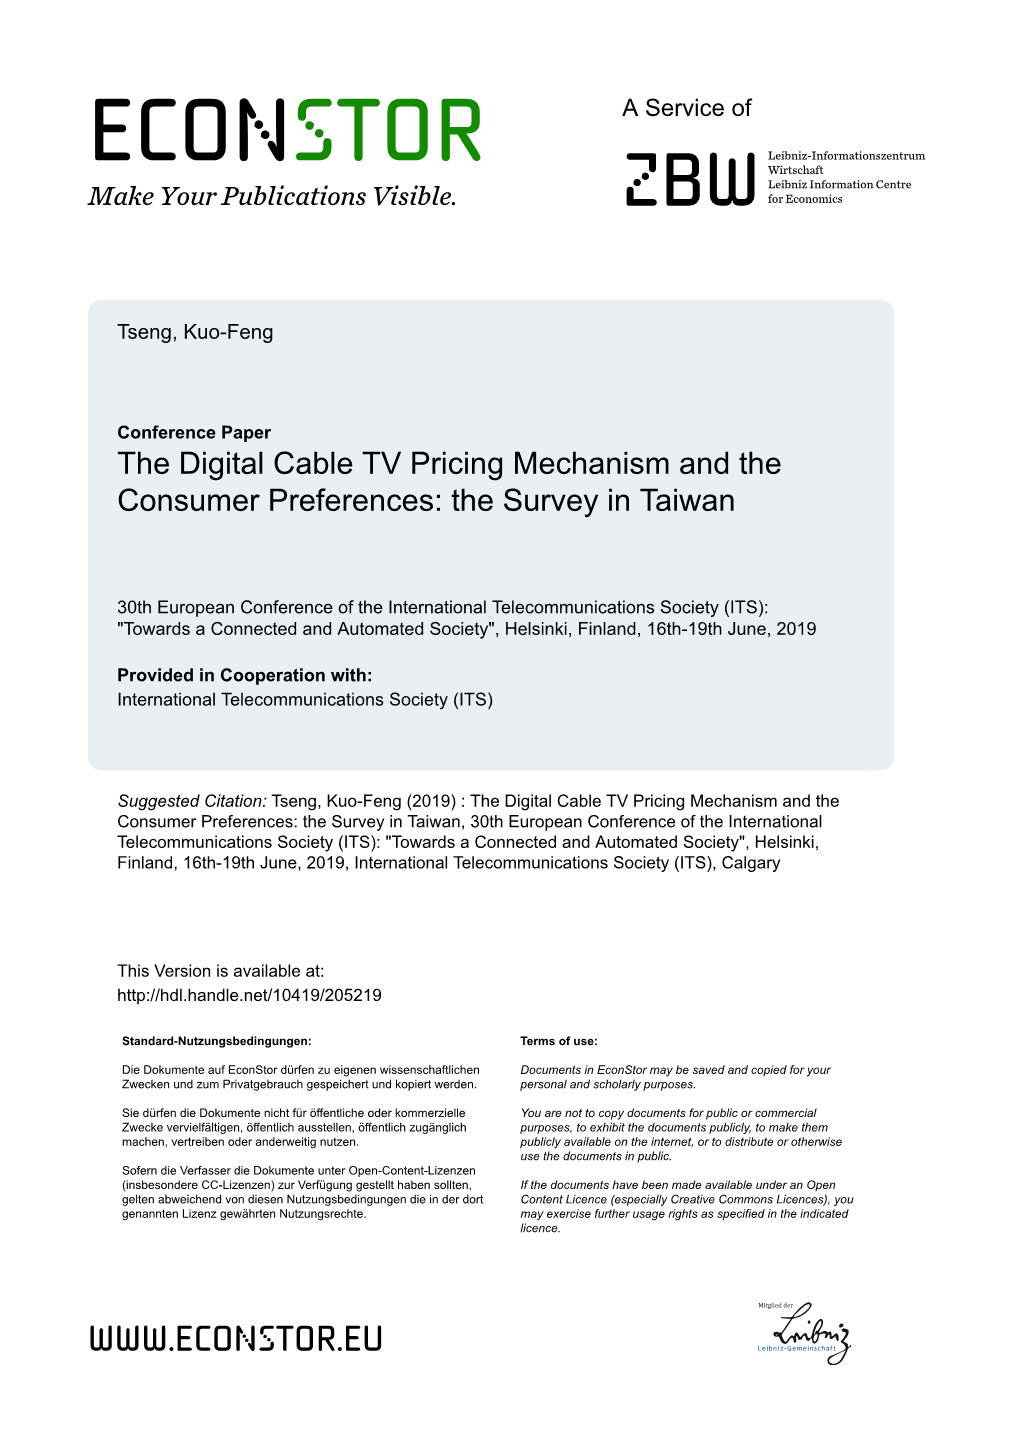 The Digital Cable TV Pricing Mechanism and the Consumer Preferences: the Survey in Taiwan